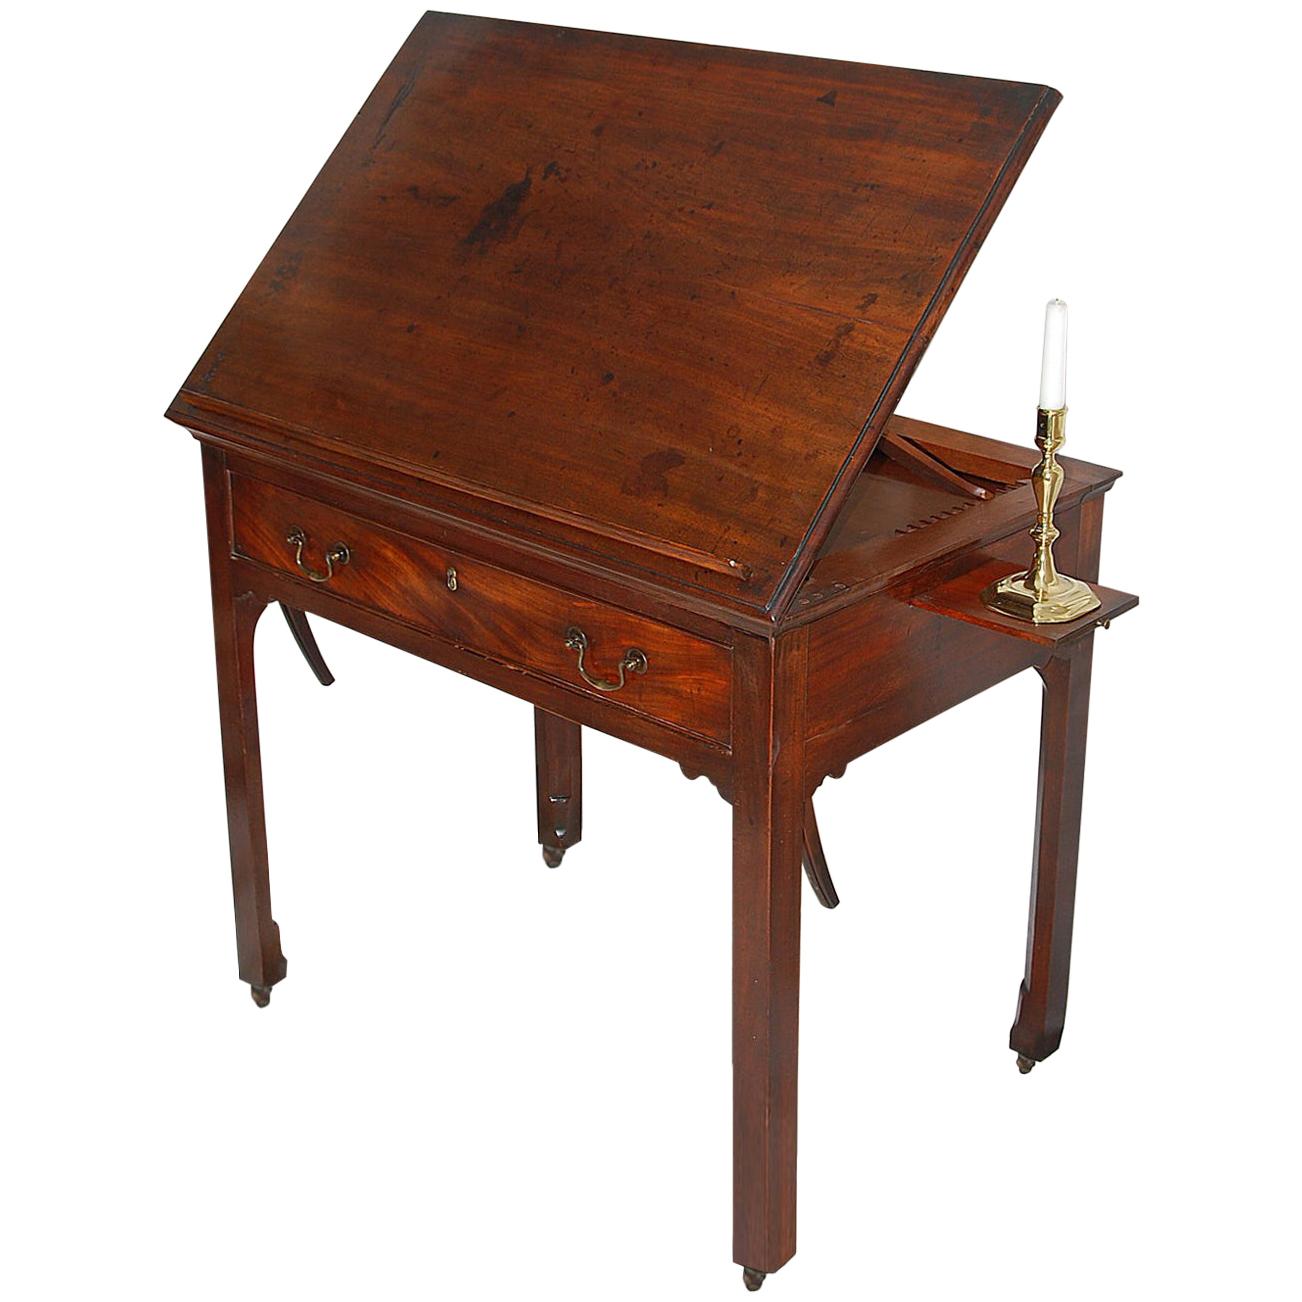 English Georgian Chippendale Mahogany Architect's Table with Candle Slides